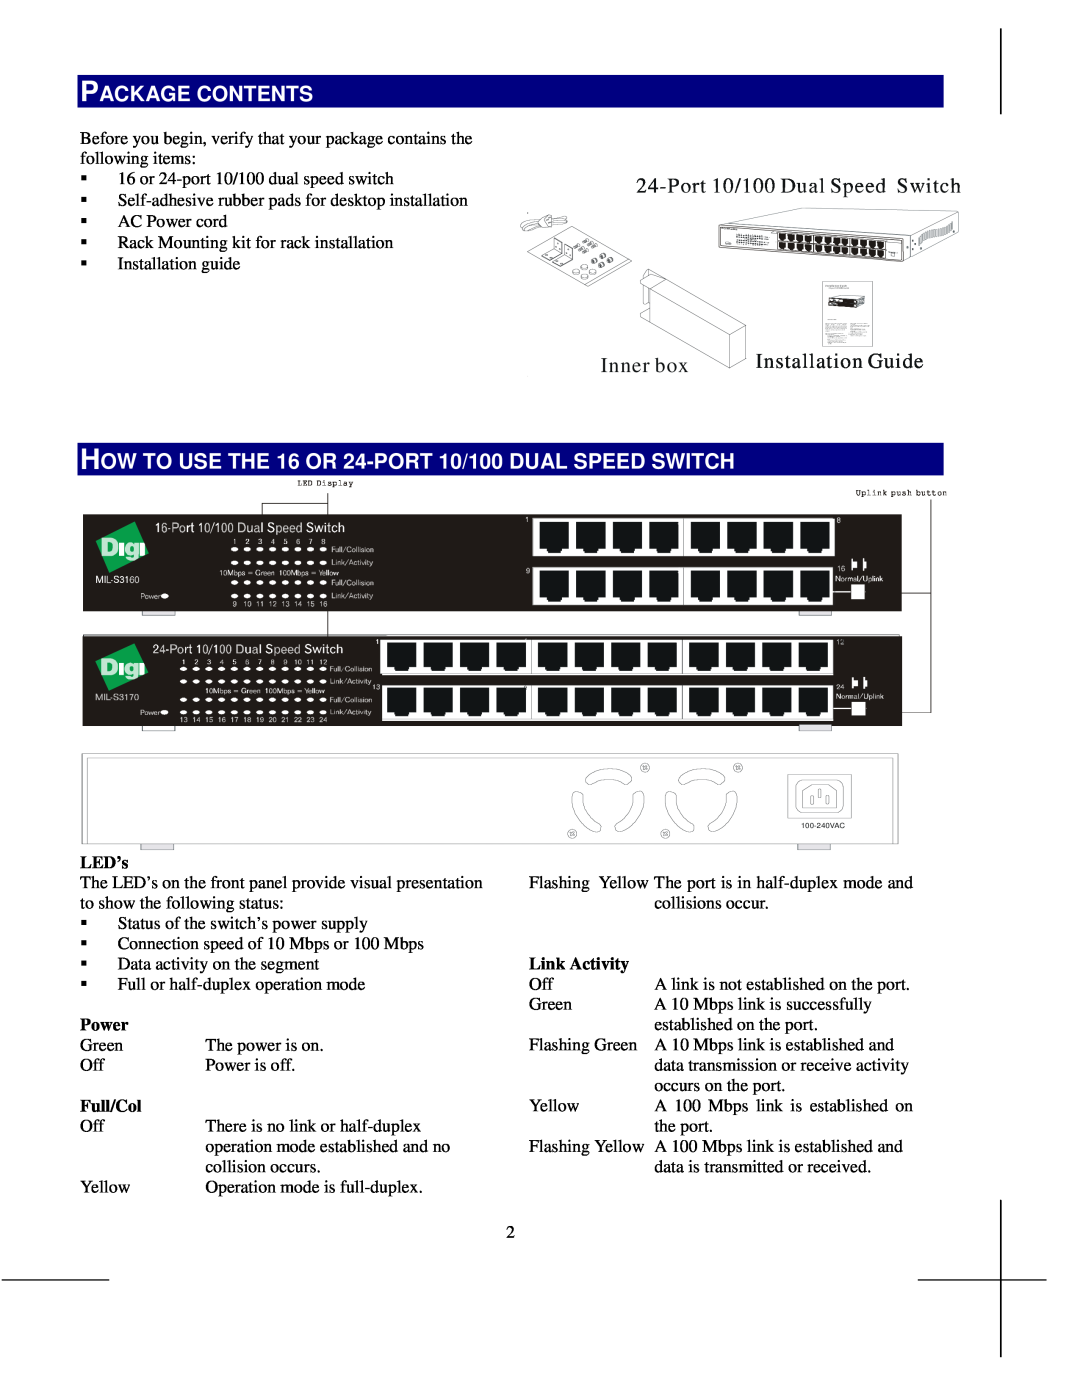 Digi MIL-S3170 Package Contents, HOW TO USE THE 16 OR 24-PORT 10/100 DUAL SPEED SWITCH, Port 10/100 Dual Speed Switch 